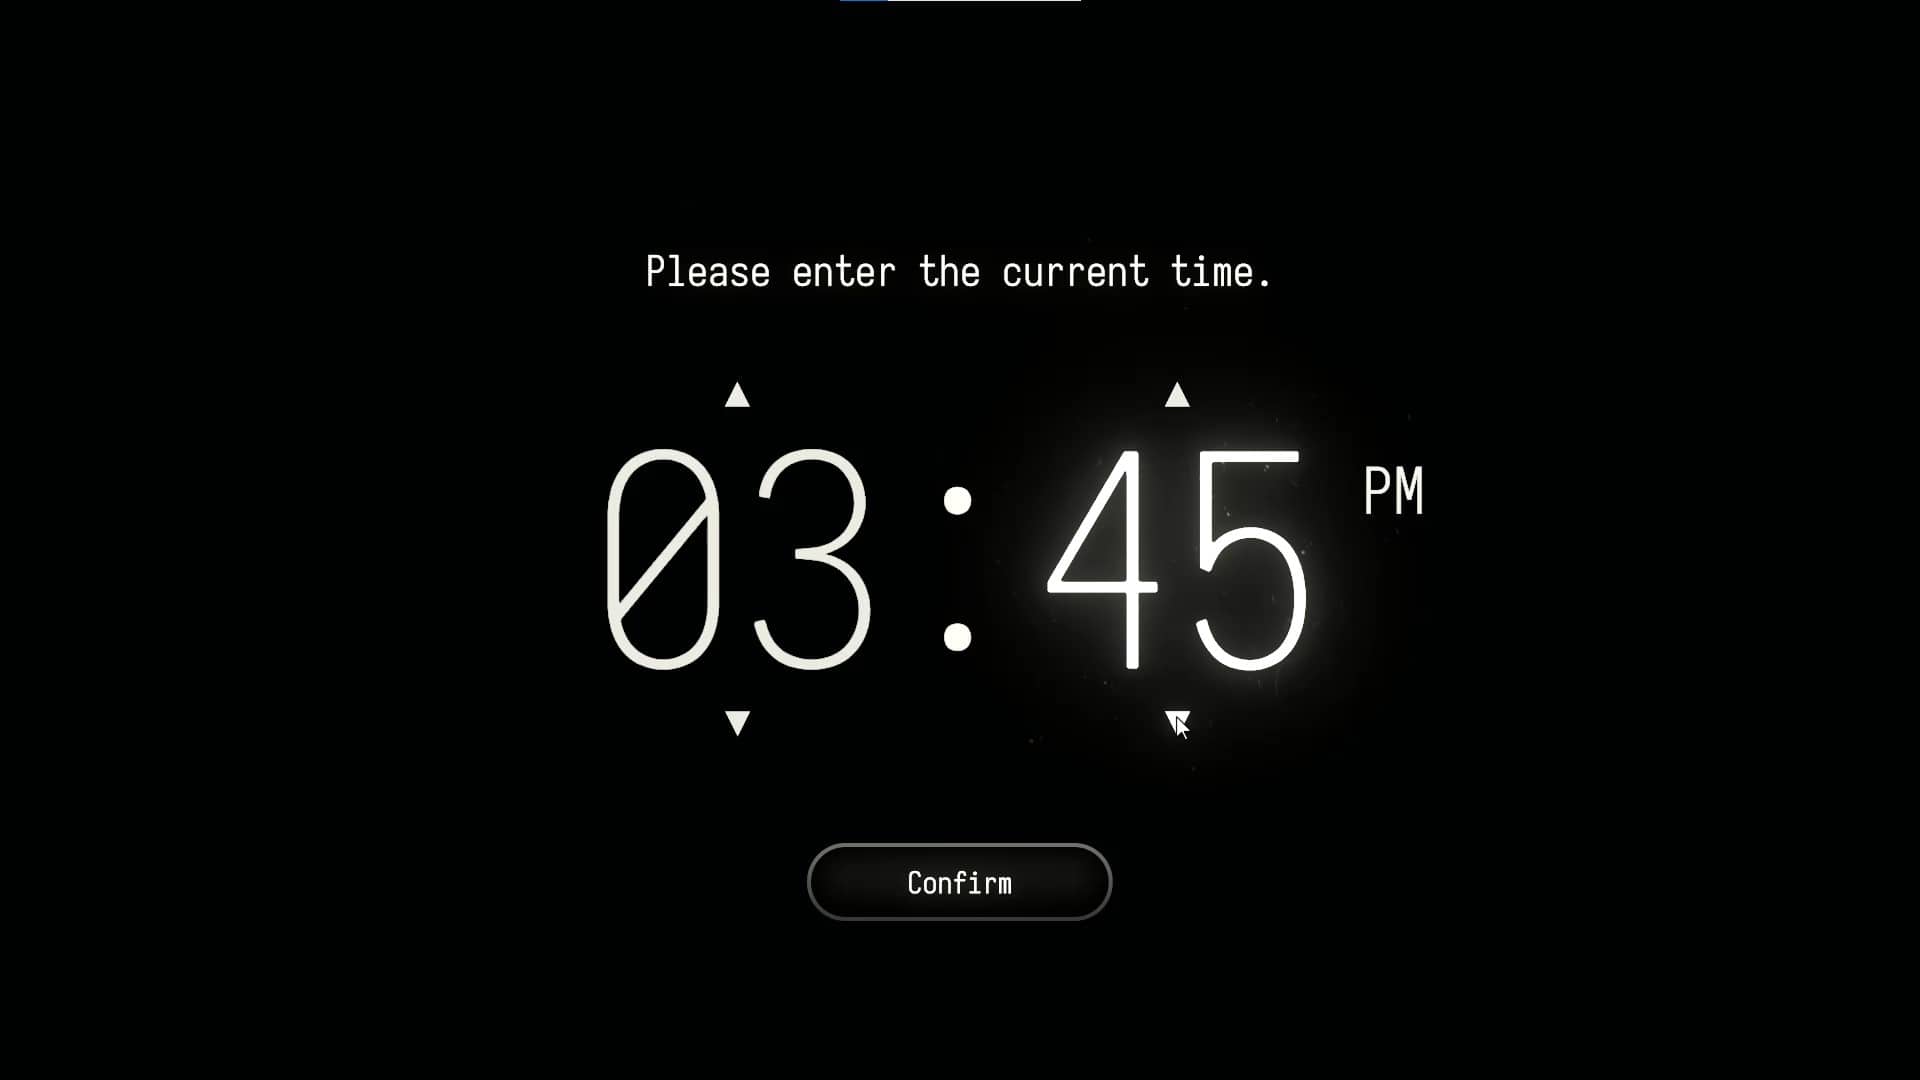 The Stanley Parable Ultra Deluxe asks you to set the time upon startup.